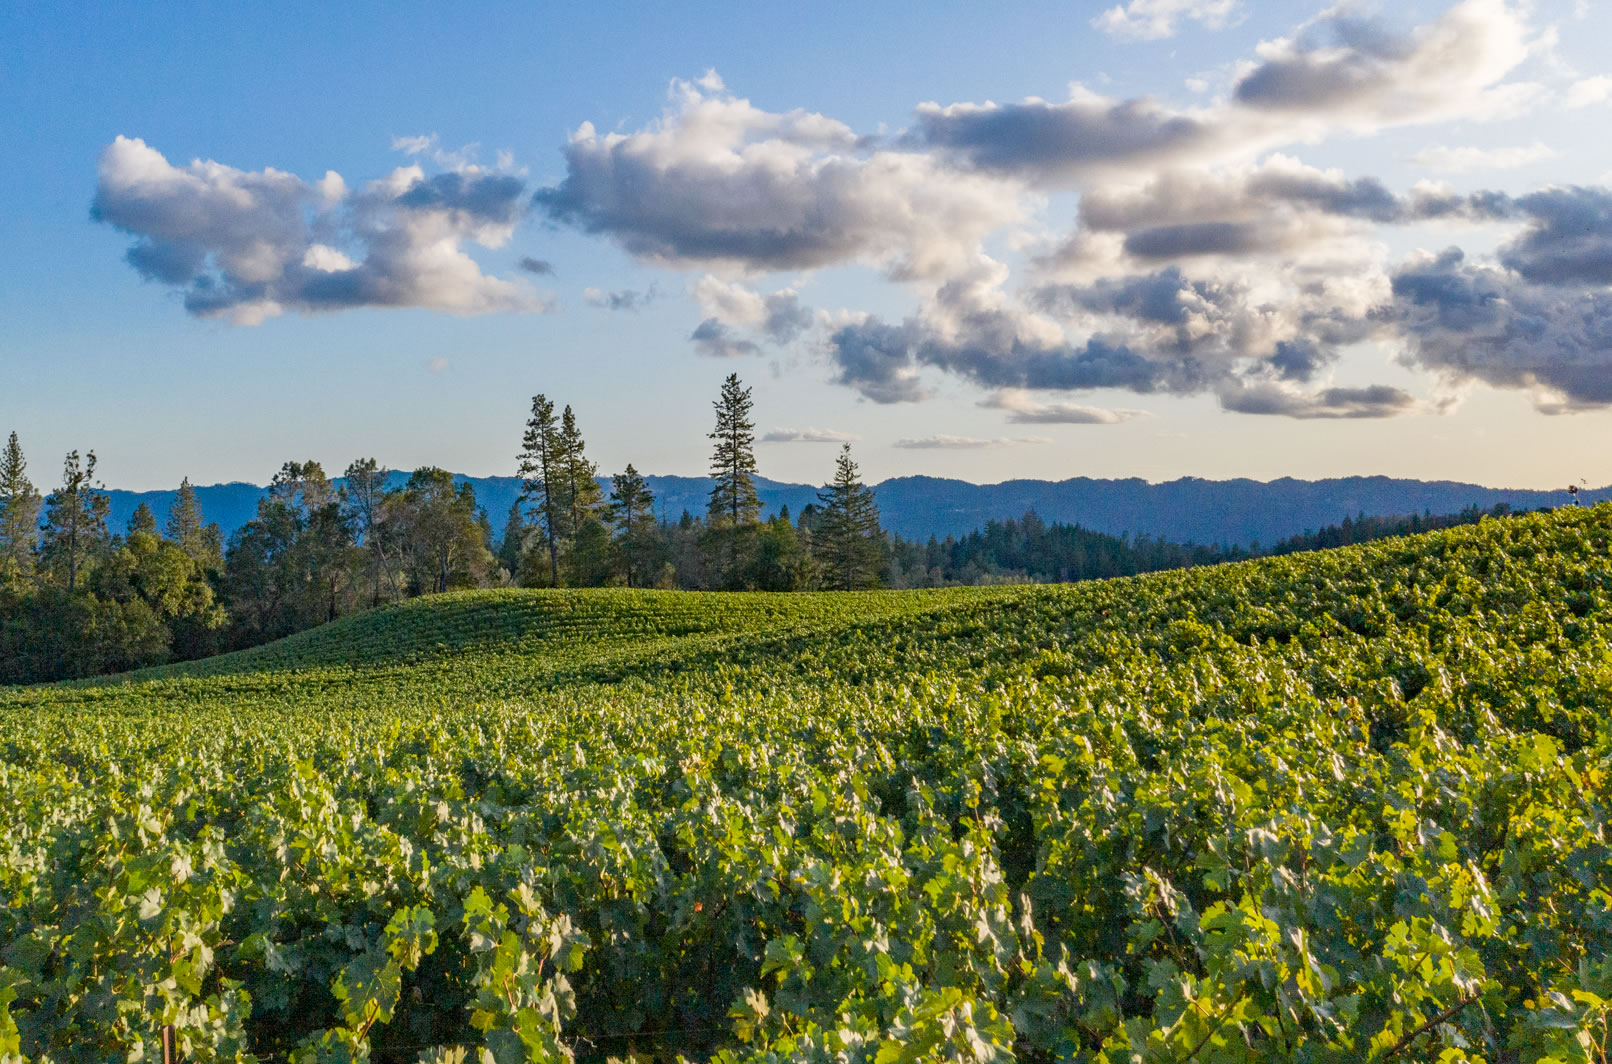 O'Shaughnessy Estate Winery's Howell Mountain Vineyard